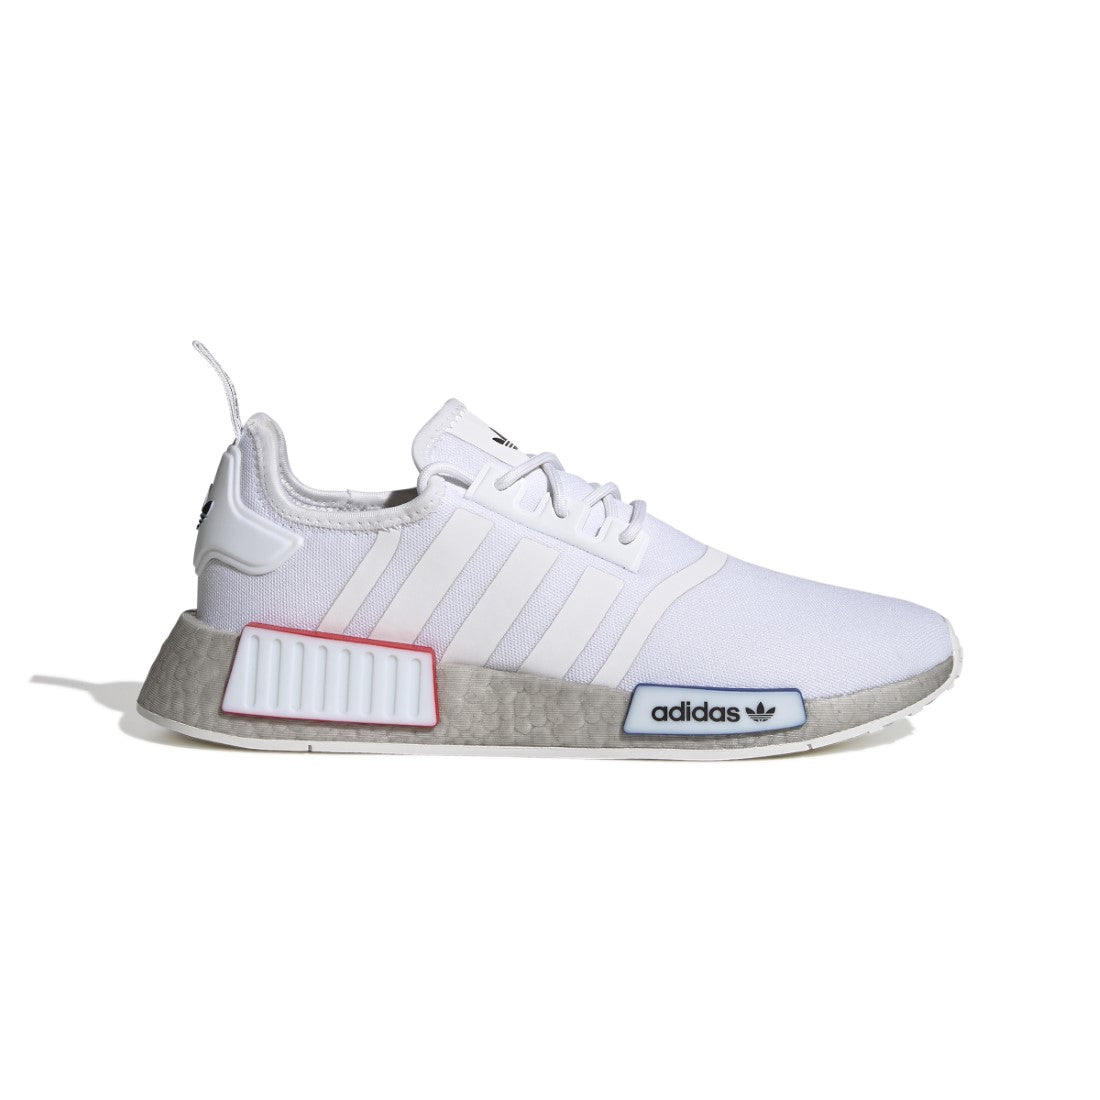 Nmd_R1 Lifestyle Shoes